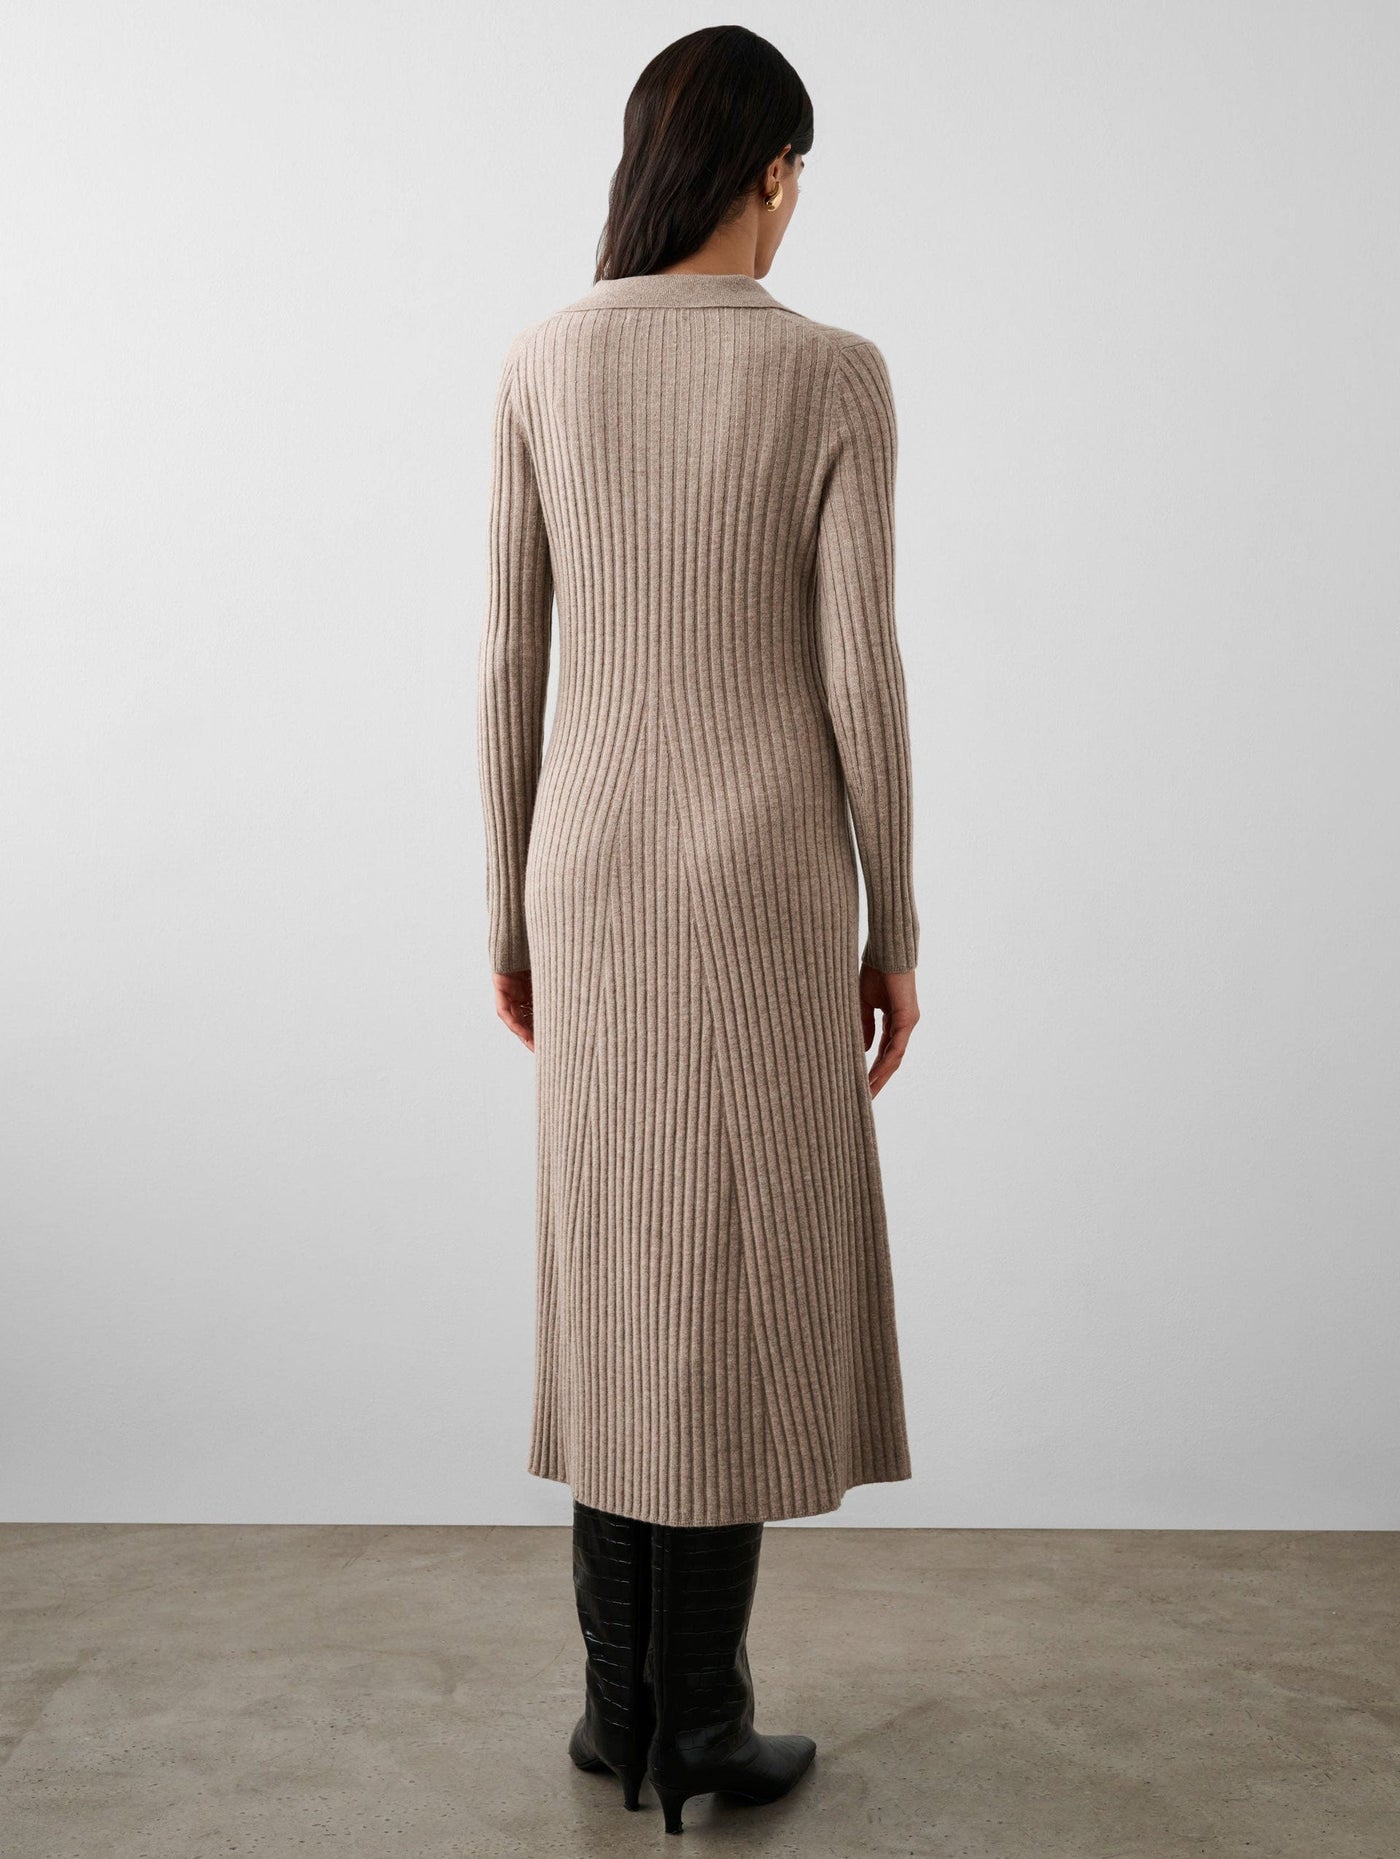 Merino Cashmere Ribbed Polo Dress by White and Warren at Paula & Chlo back view